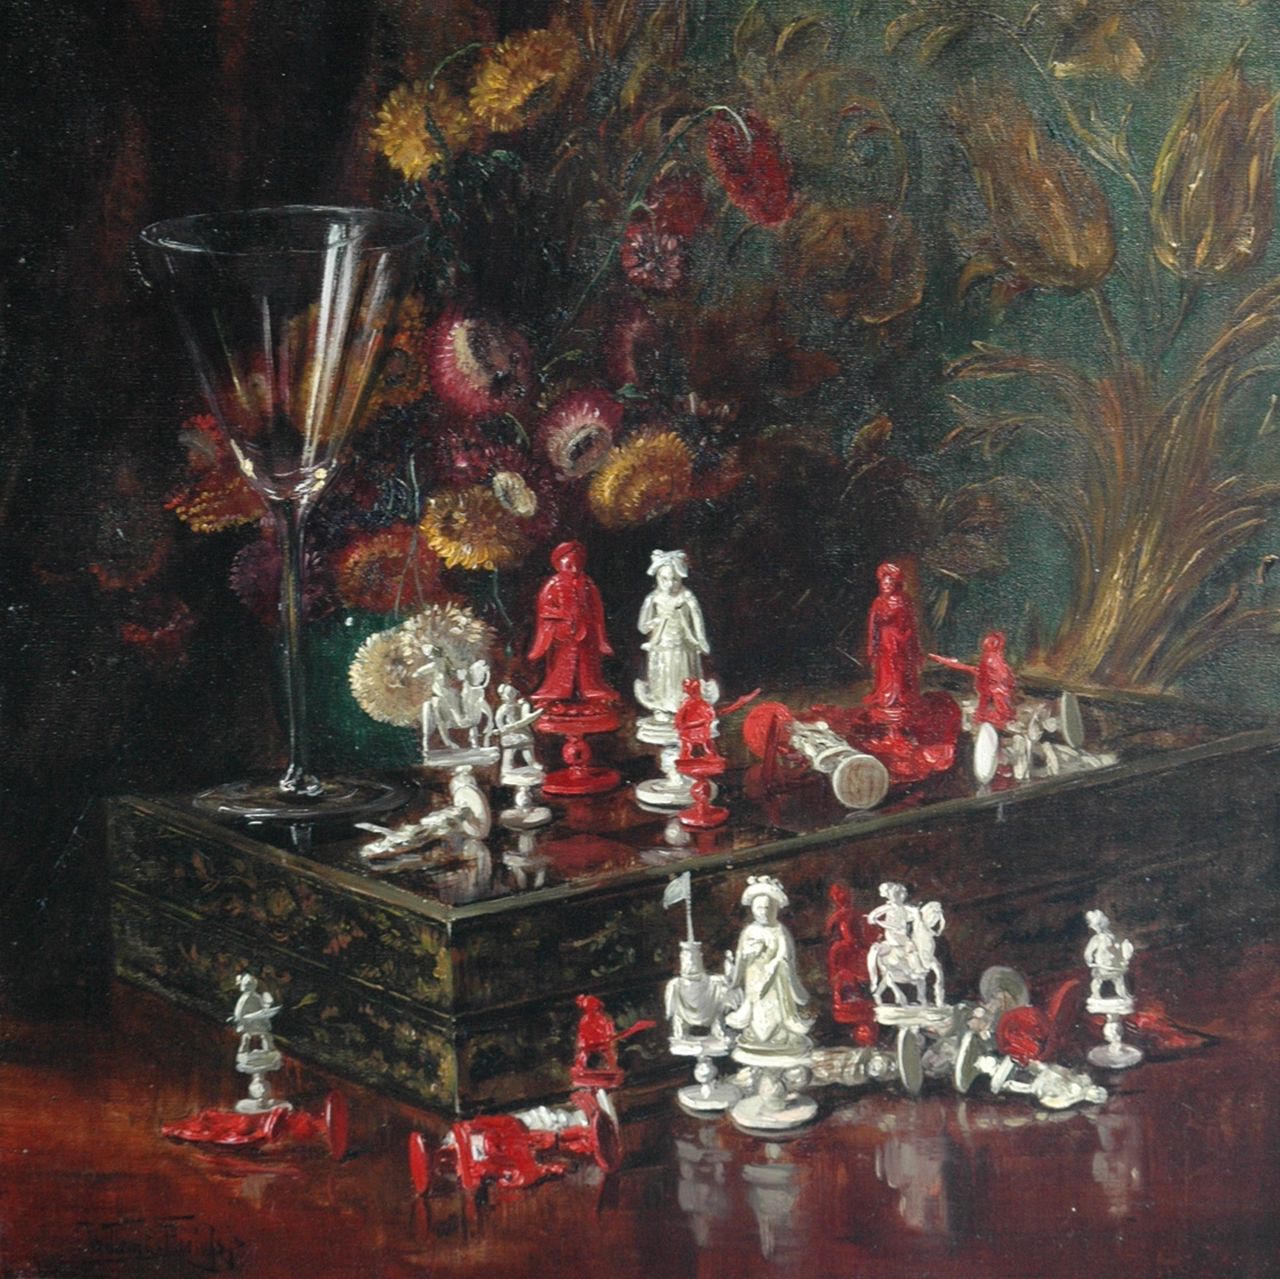 Roelofs jr. W.E.  | Willem Elisa Roelofs jr., Still life with Chinese chess pieces, oil on canvas 45.5 x 45.7 cm, signed l.l.